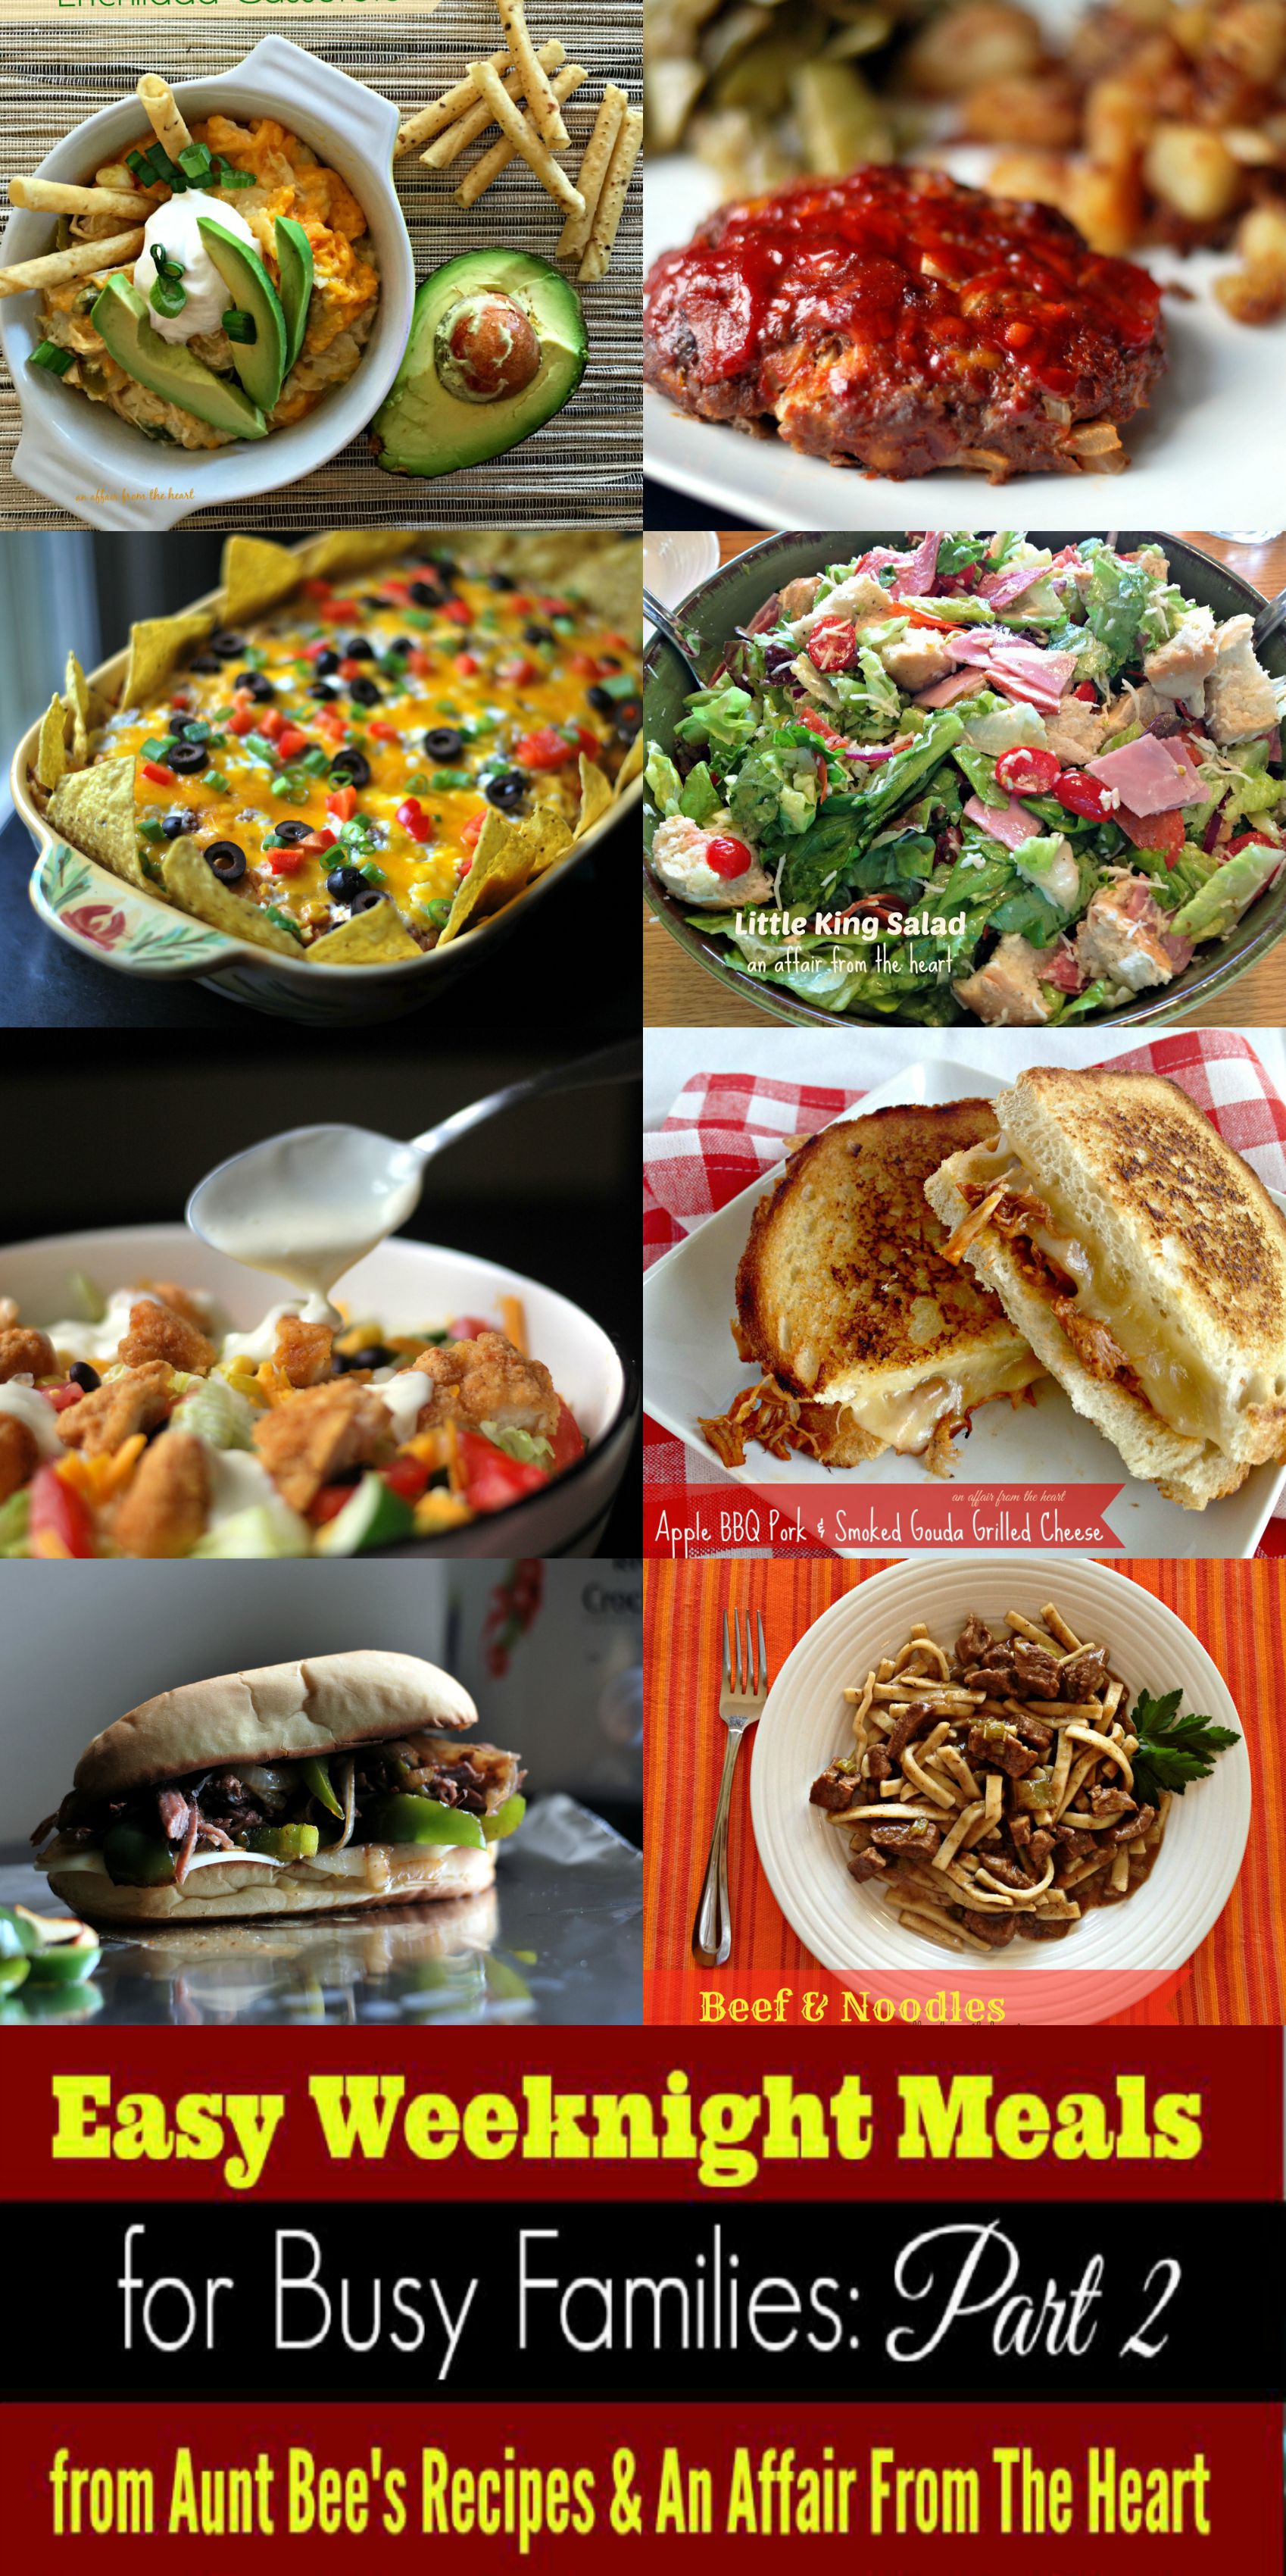 Easy Weeknight Meals For Busy Families: Part 2 – Aunt Bee's Recipes